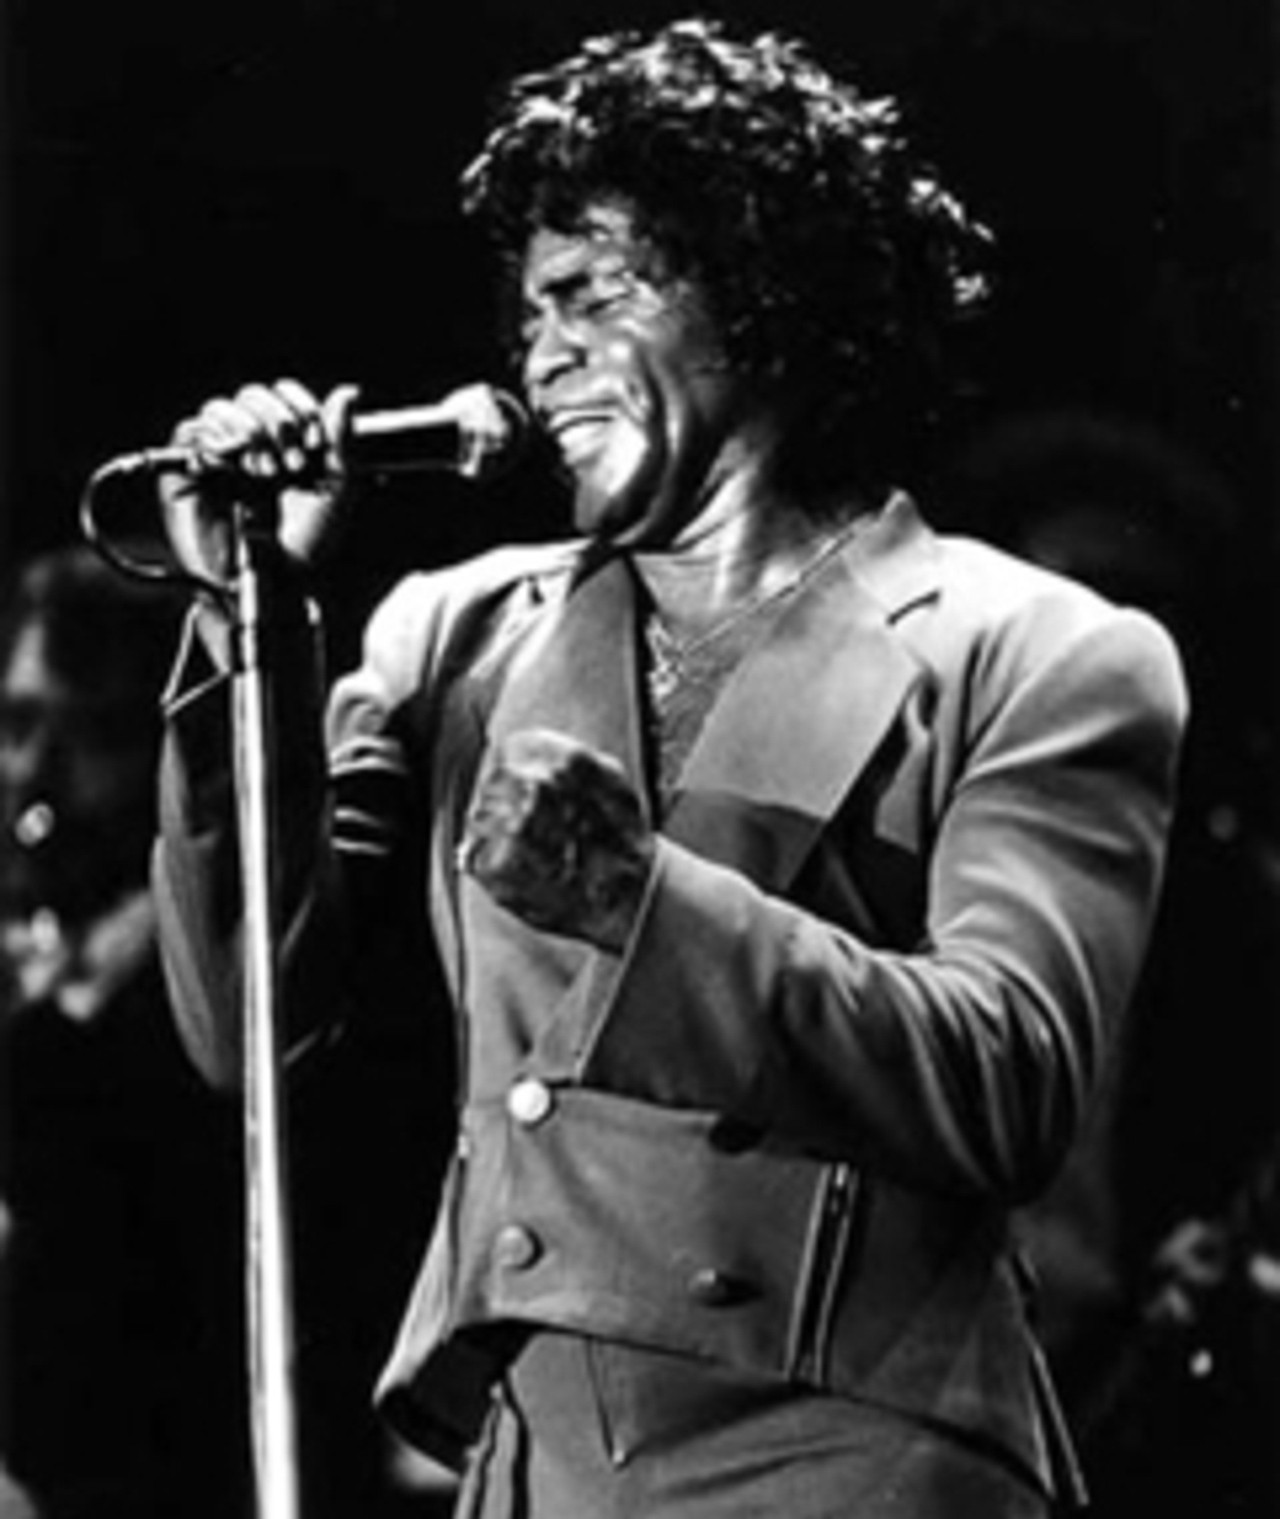 Photo of James Brown